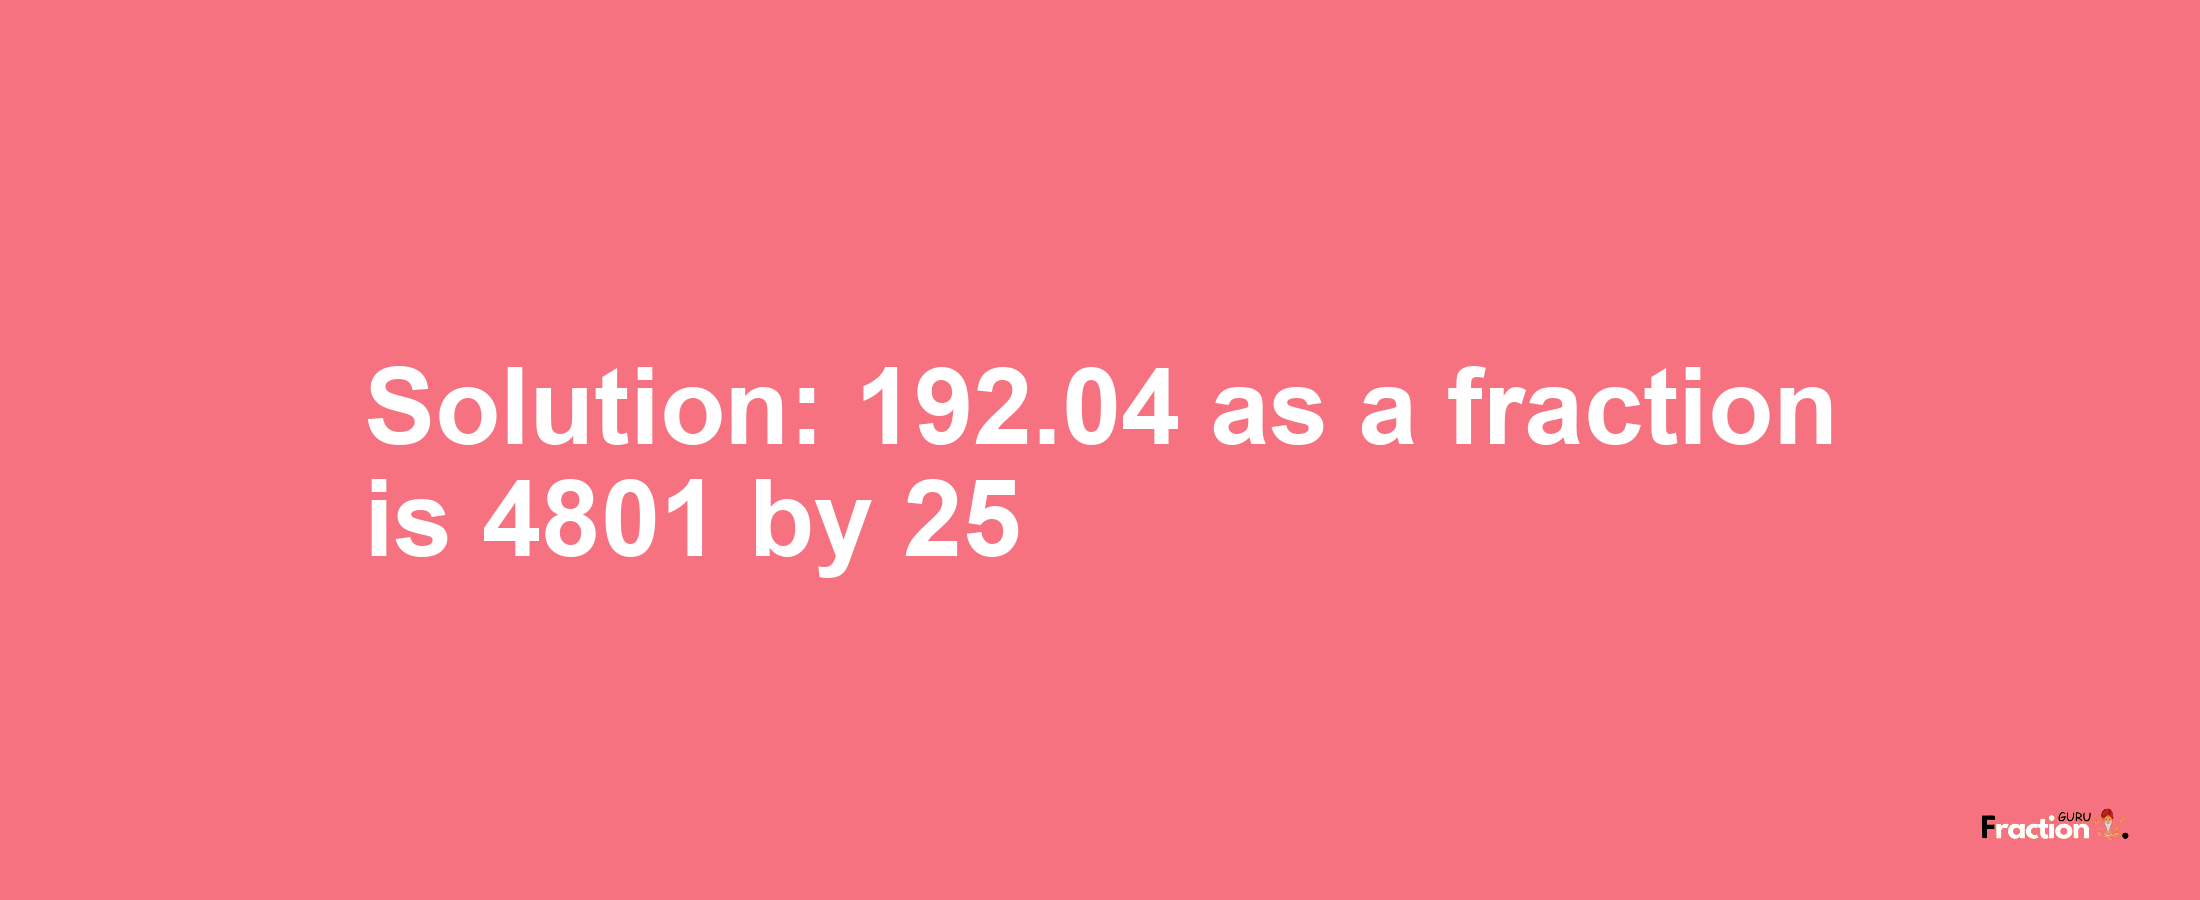 Solution:192.04 as a fraction is 4801/25